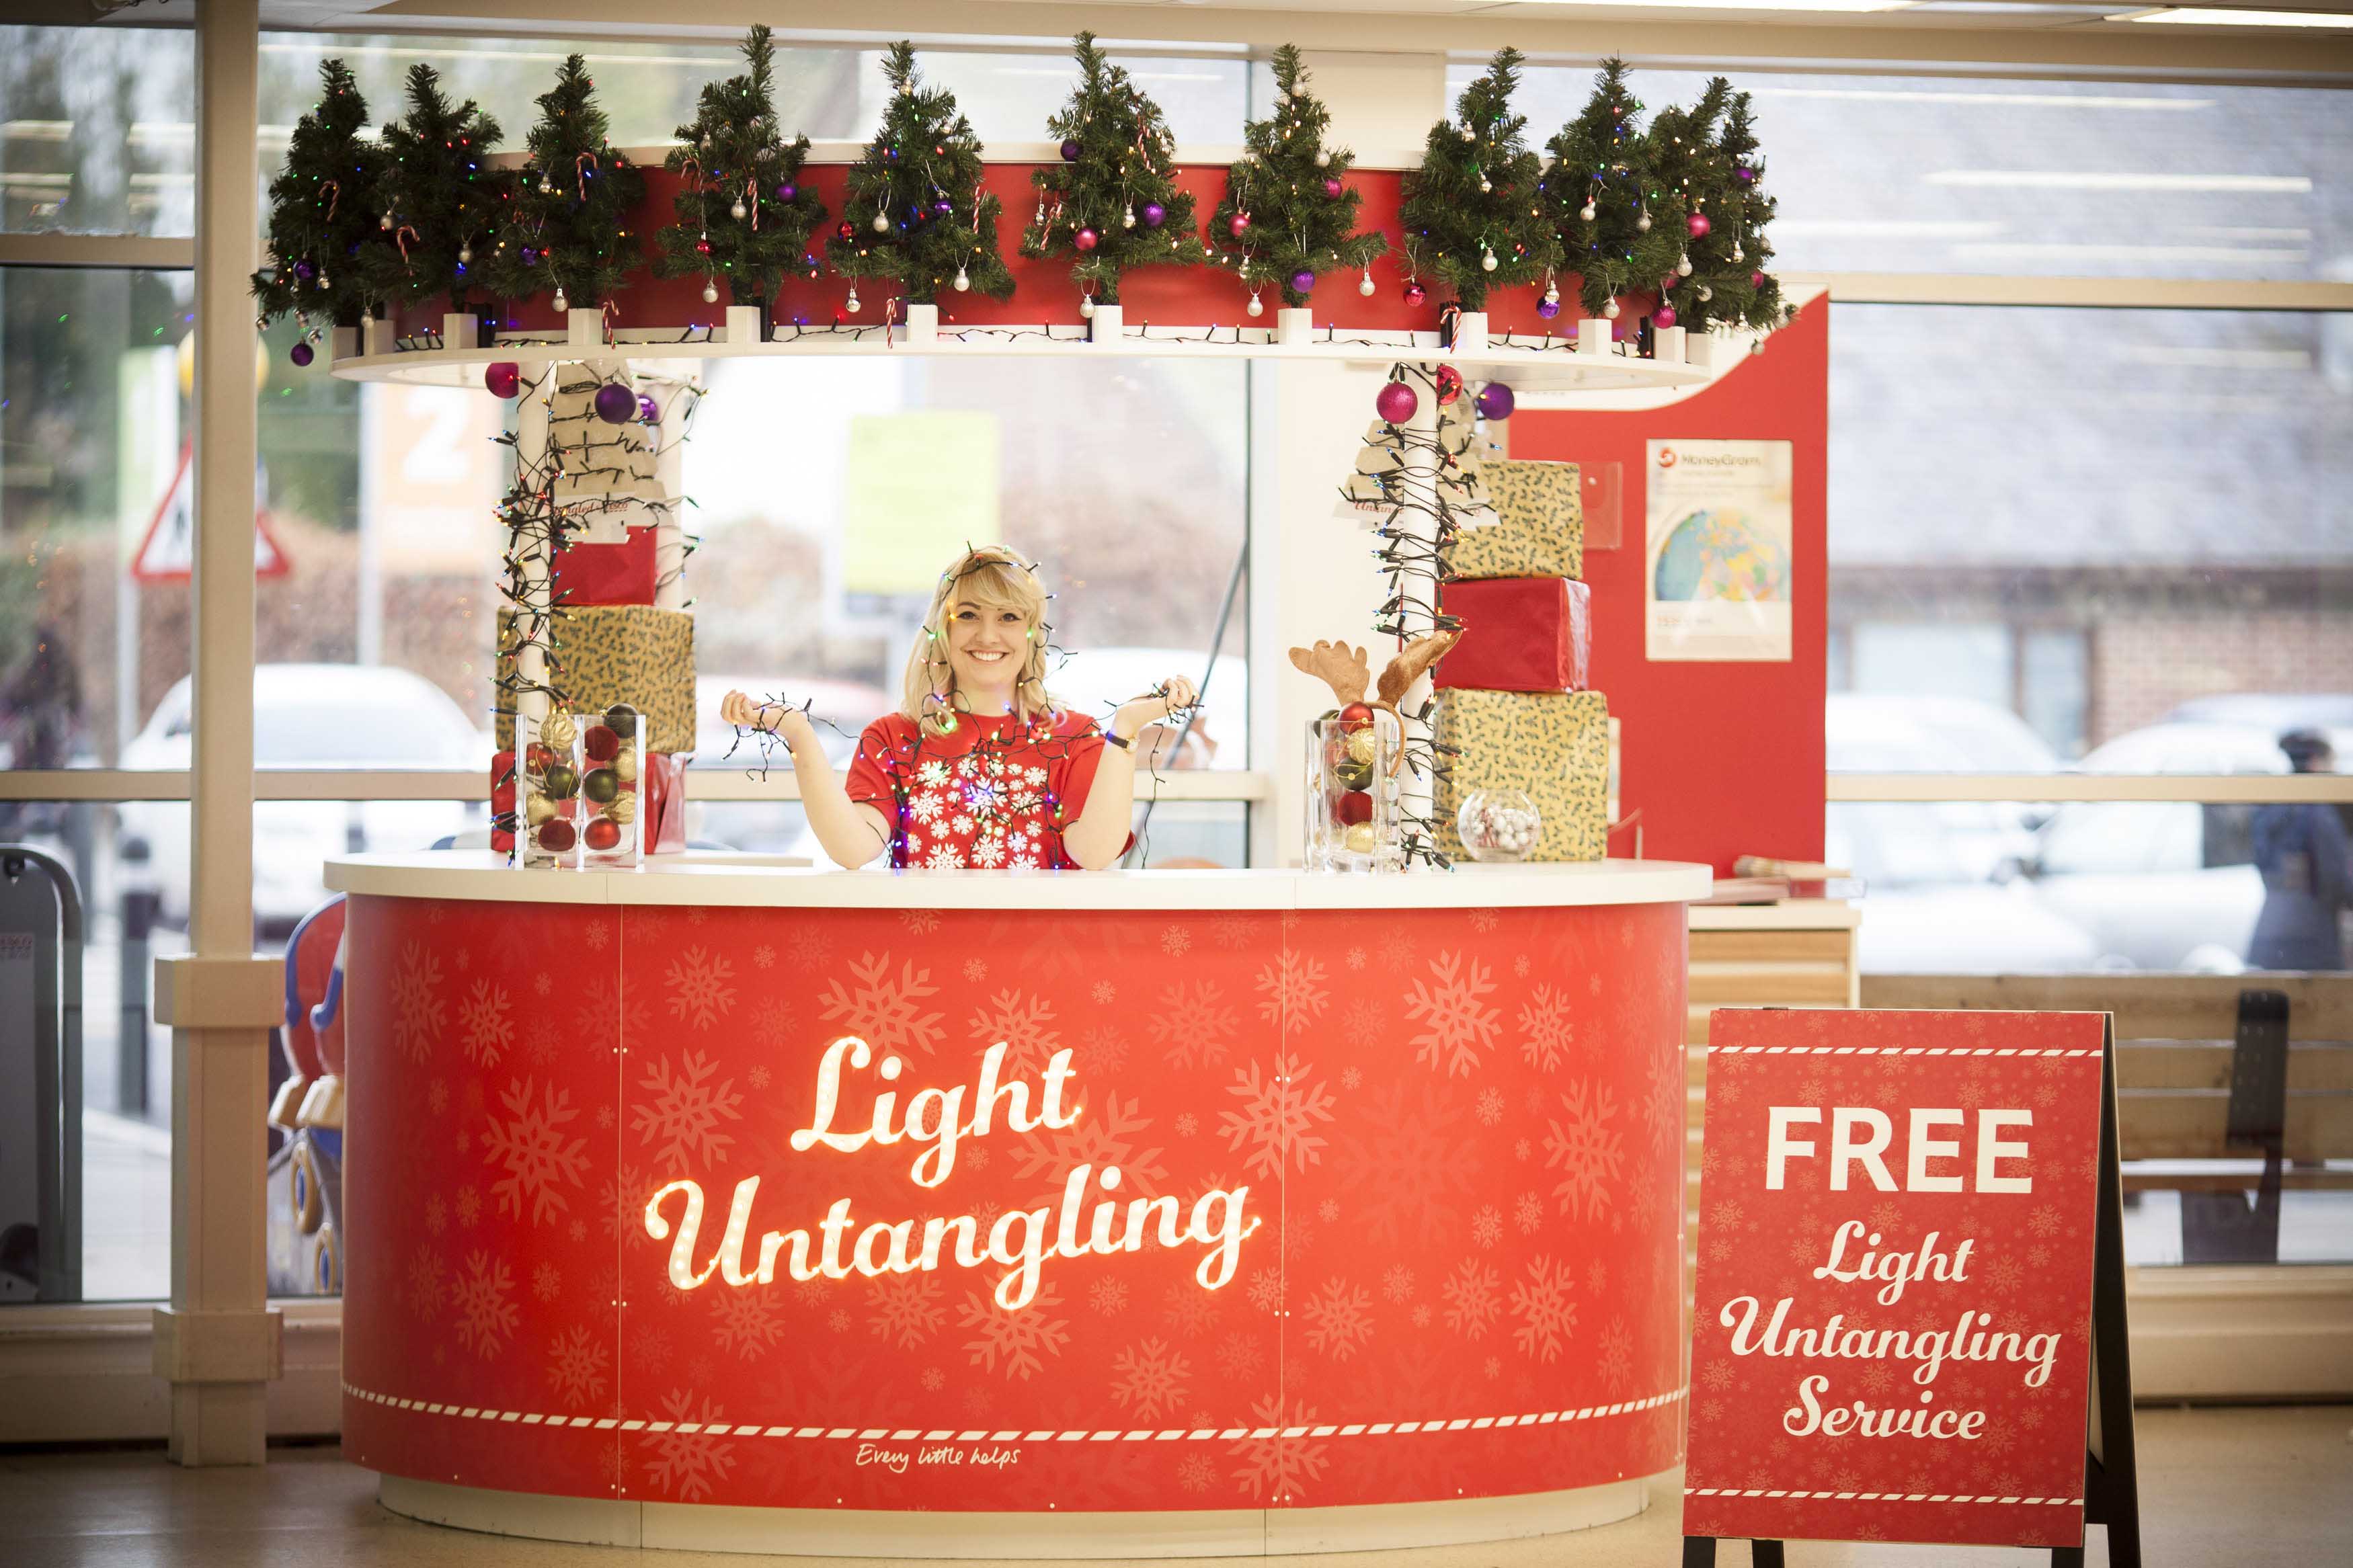 Tesco Extra store in Wrexham, North Wales hires UK’s first ever Christmas Tree Lights Untangler, Anya Mugridge 